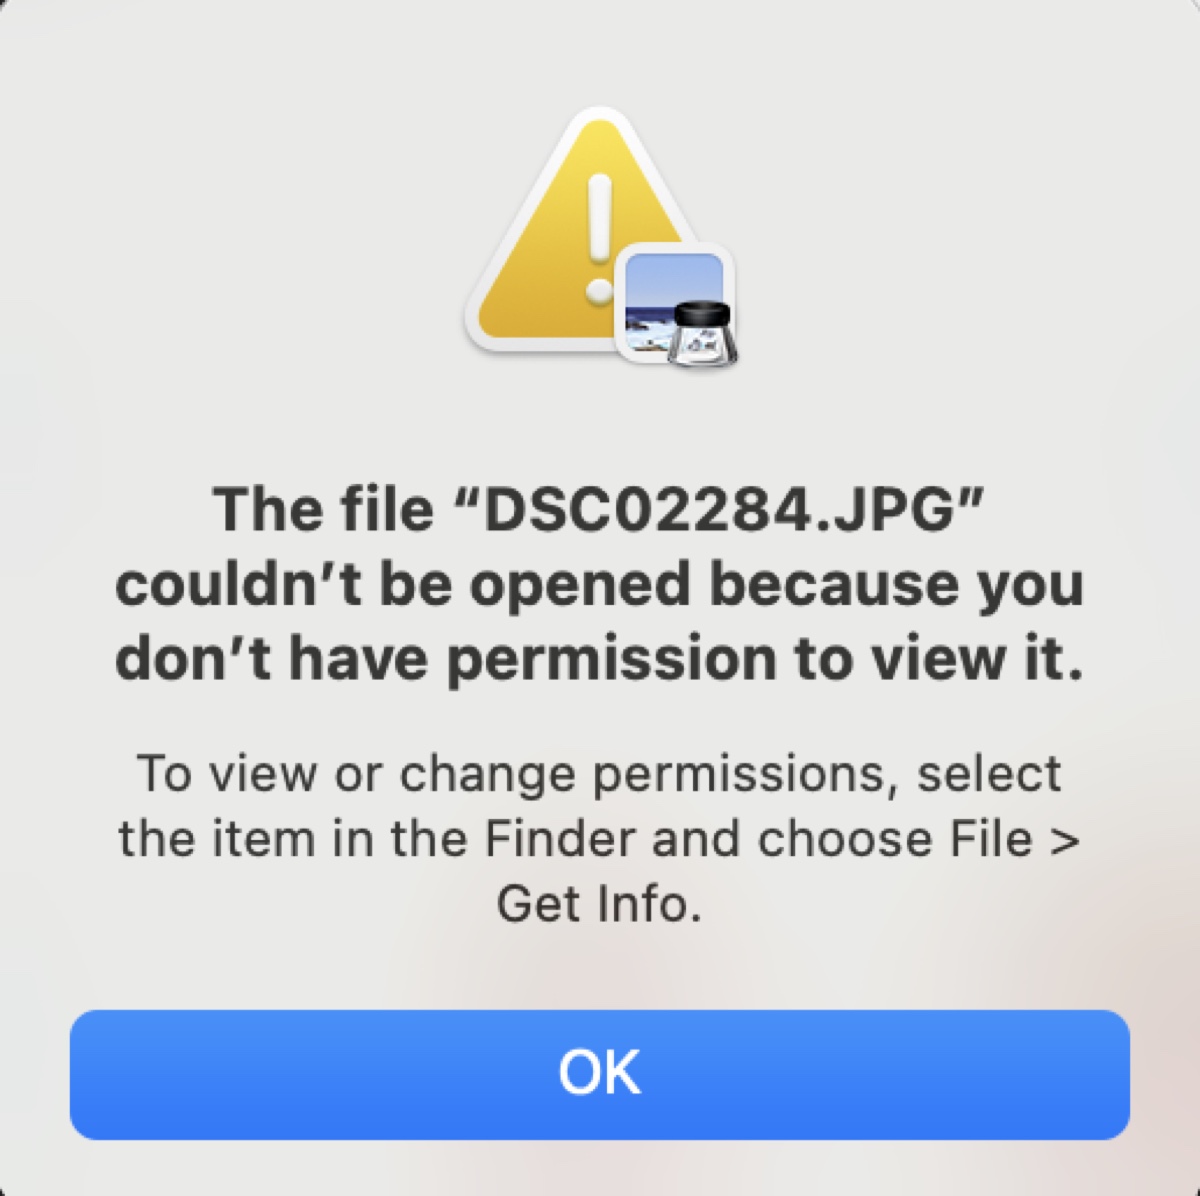 The file couldnt be opened because you dont have permission to view it